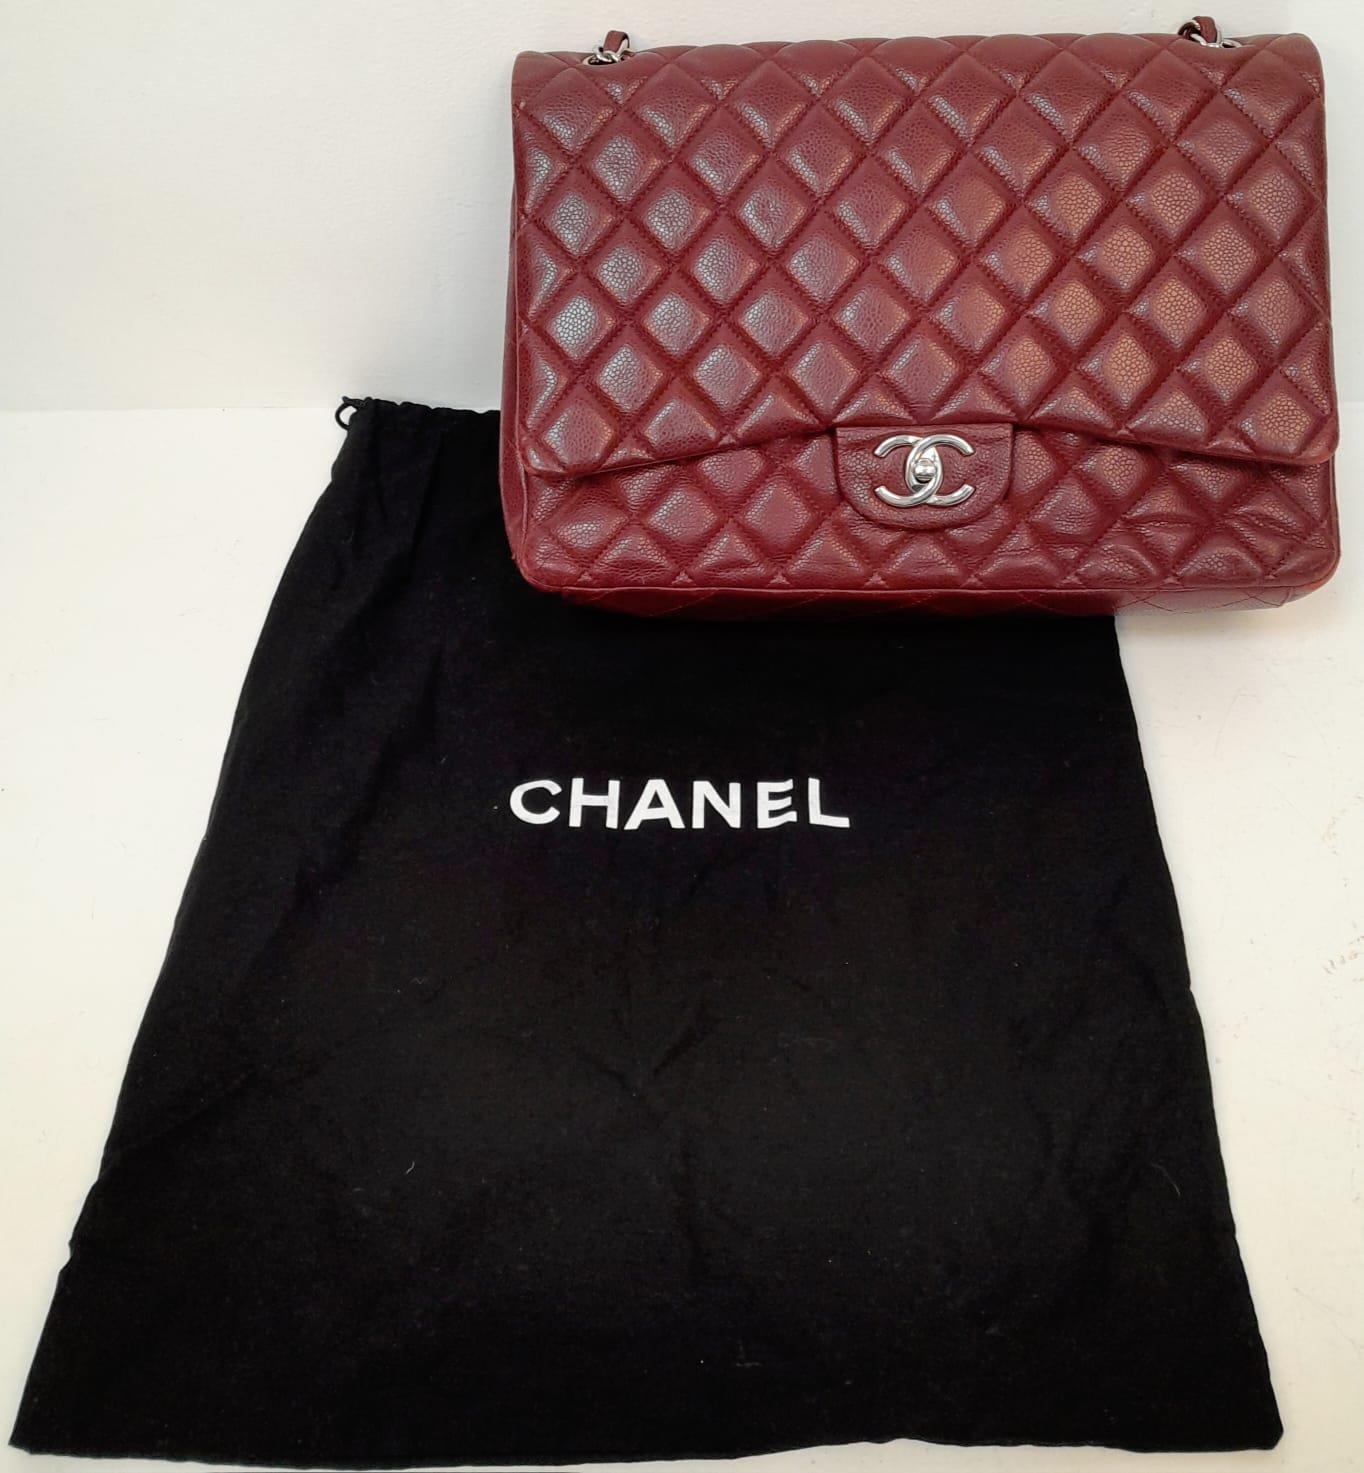 A Chanel Burgundy Jumbo Classic Double Flap Bag. Quilted leather exterior with silver-toned - Image 4 of 16